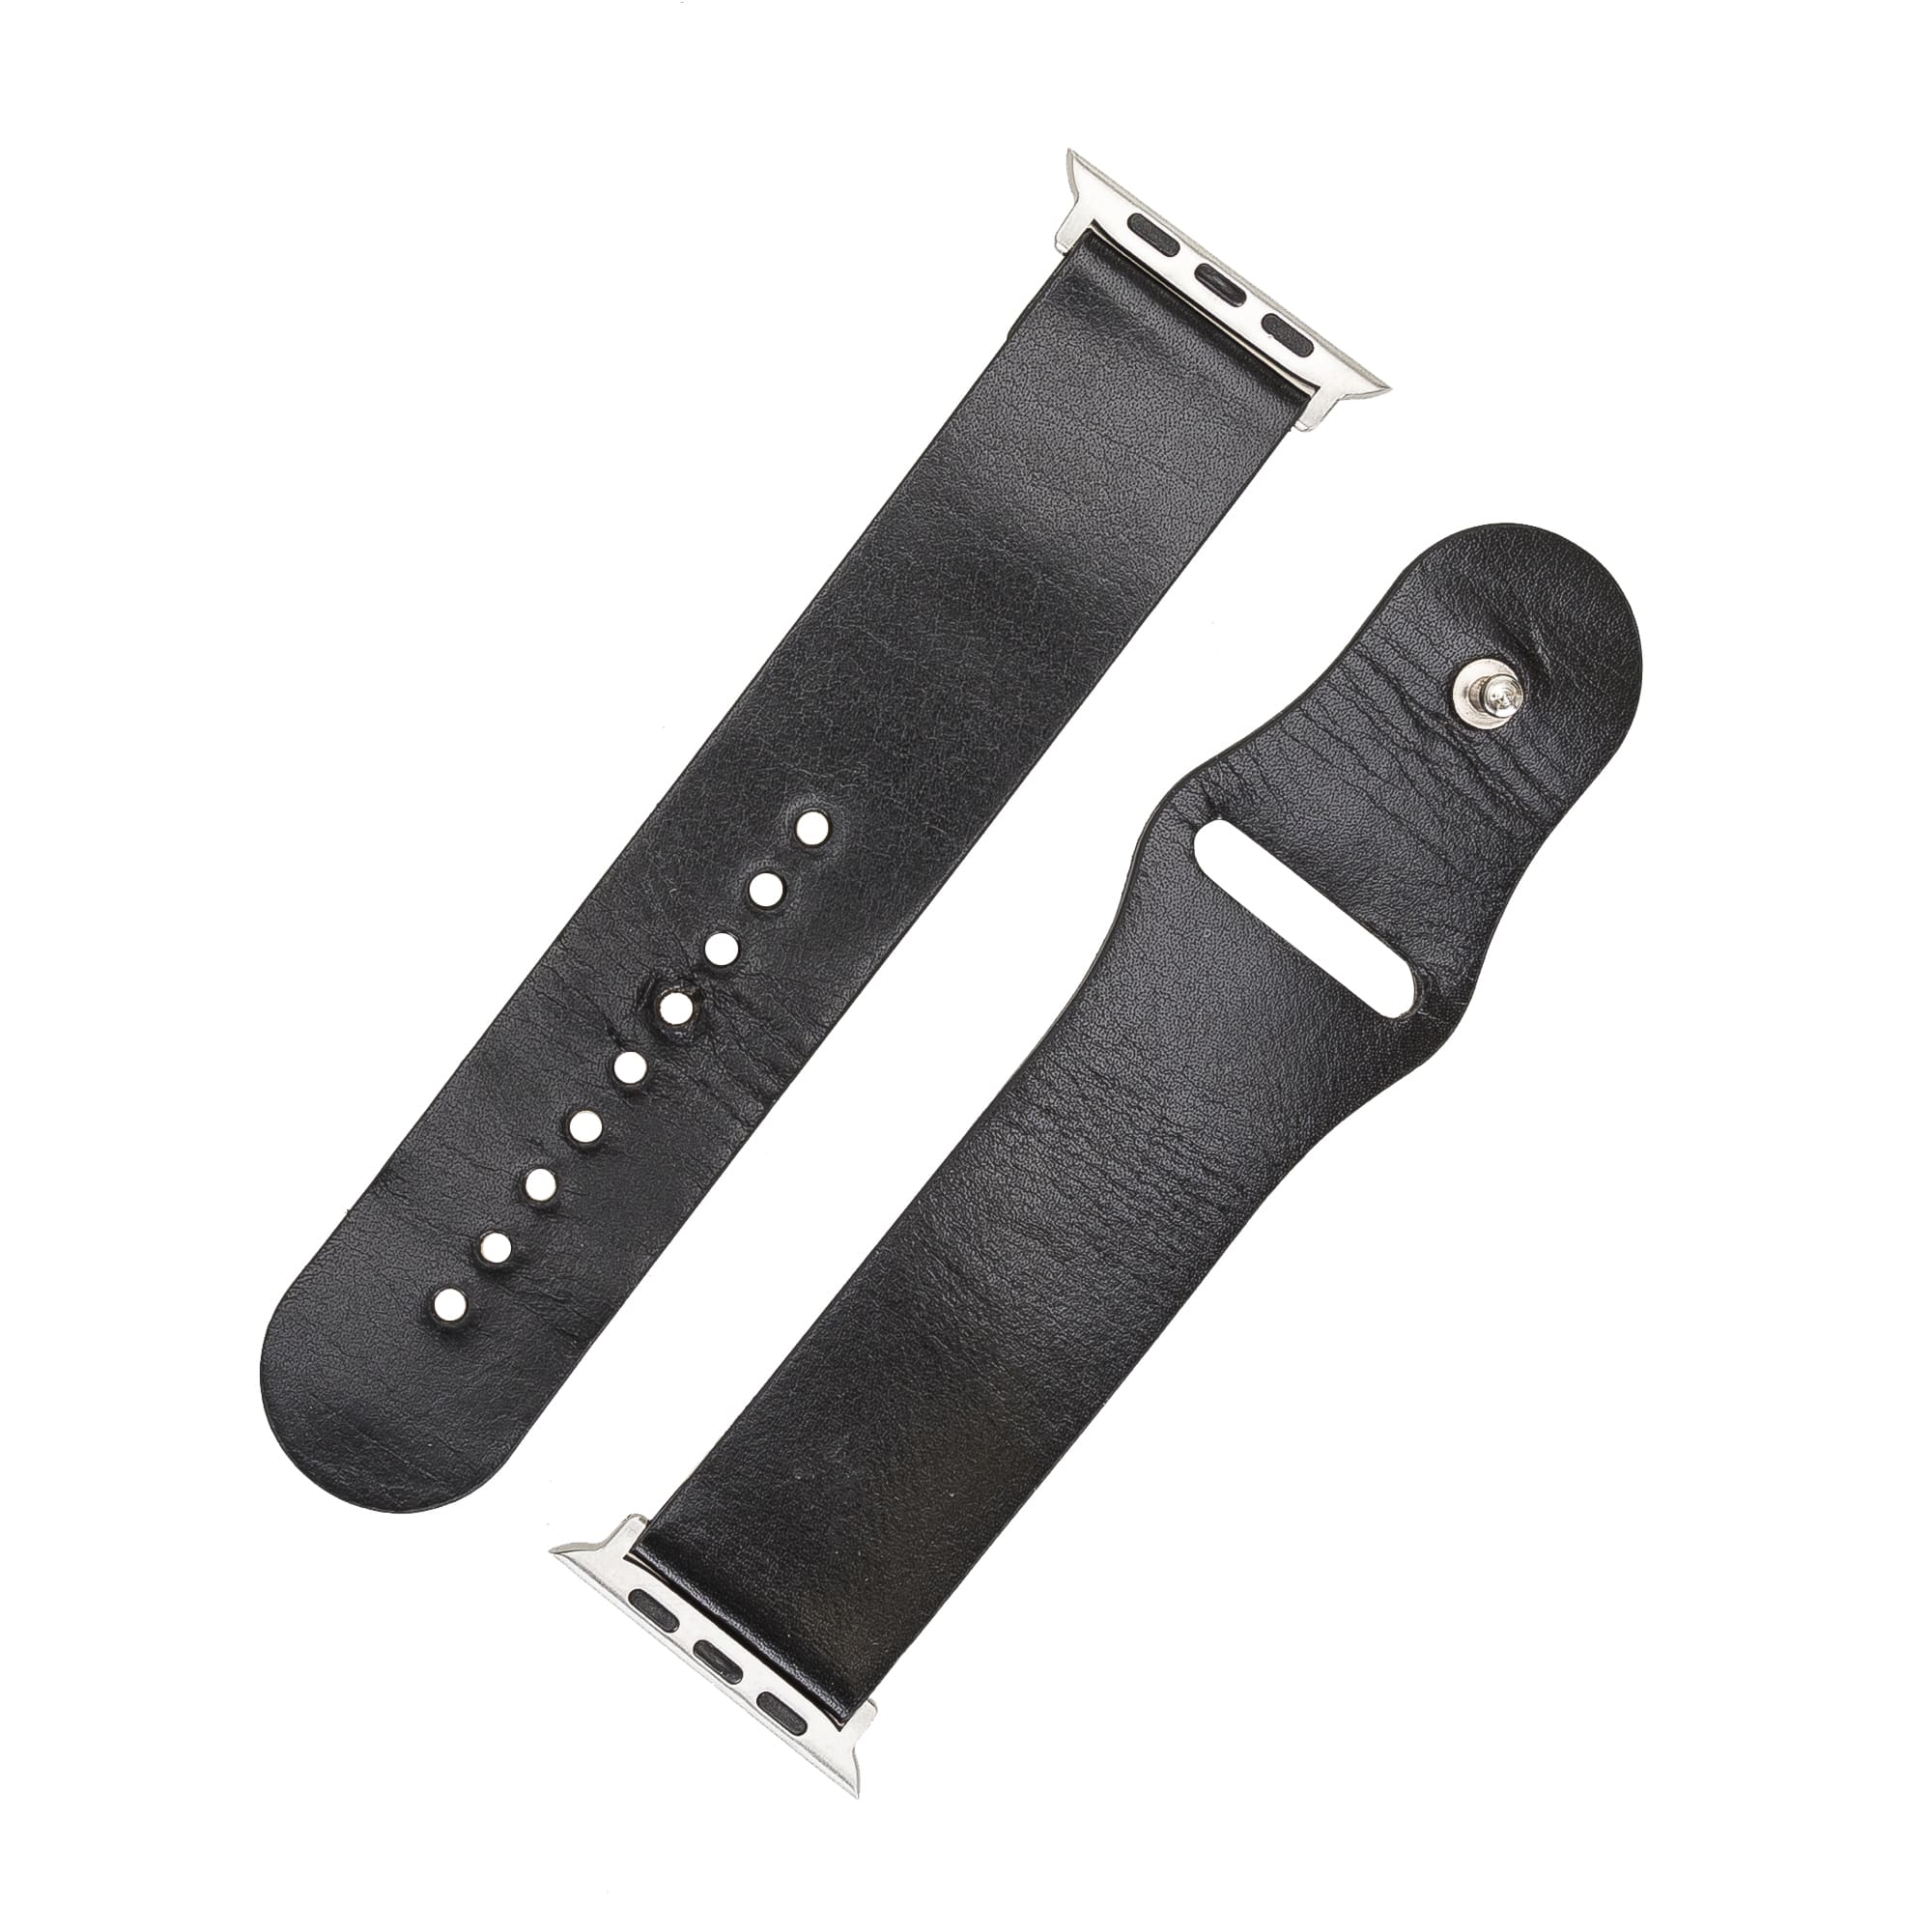 Hackney Black Genuine Leather Apple Watch Band Strap 38mm 40mm 42mm 44mm 45mm for All Series - Bomonti - 4